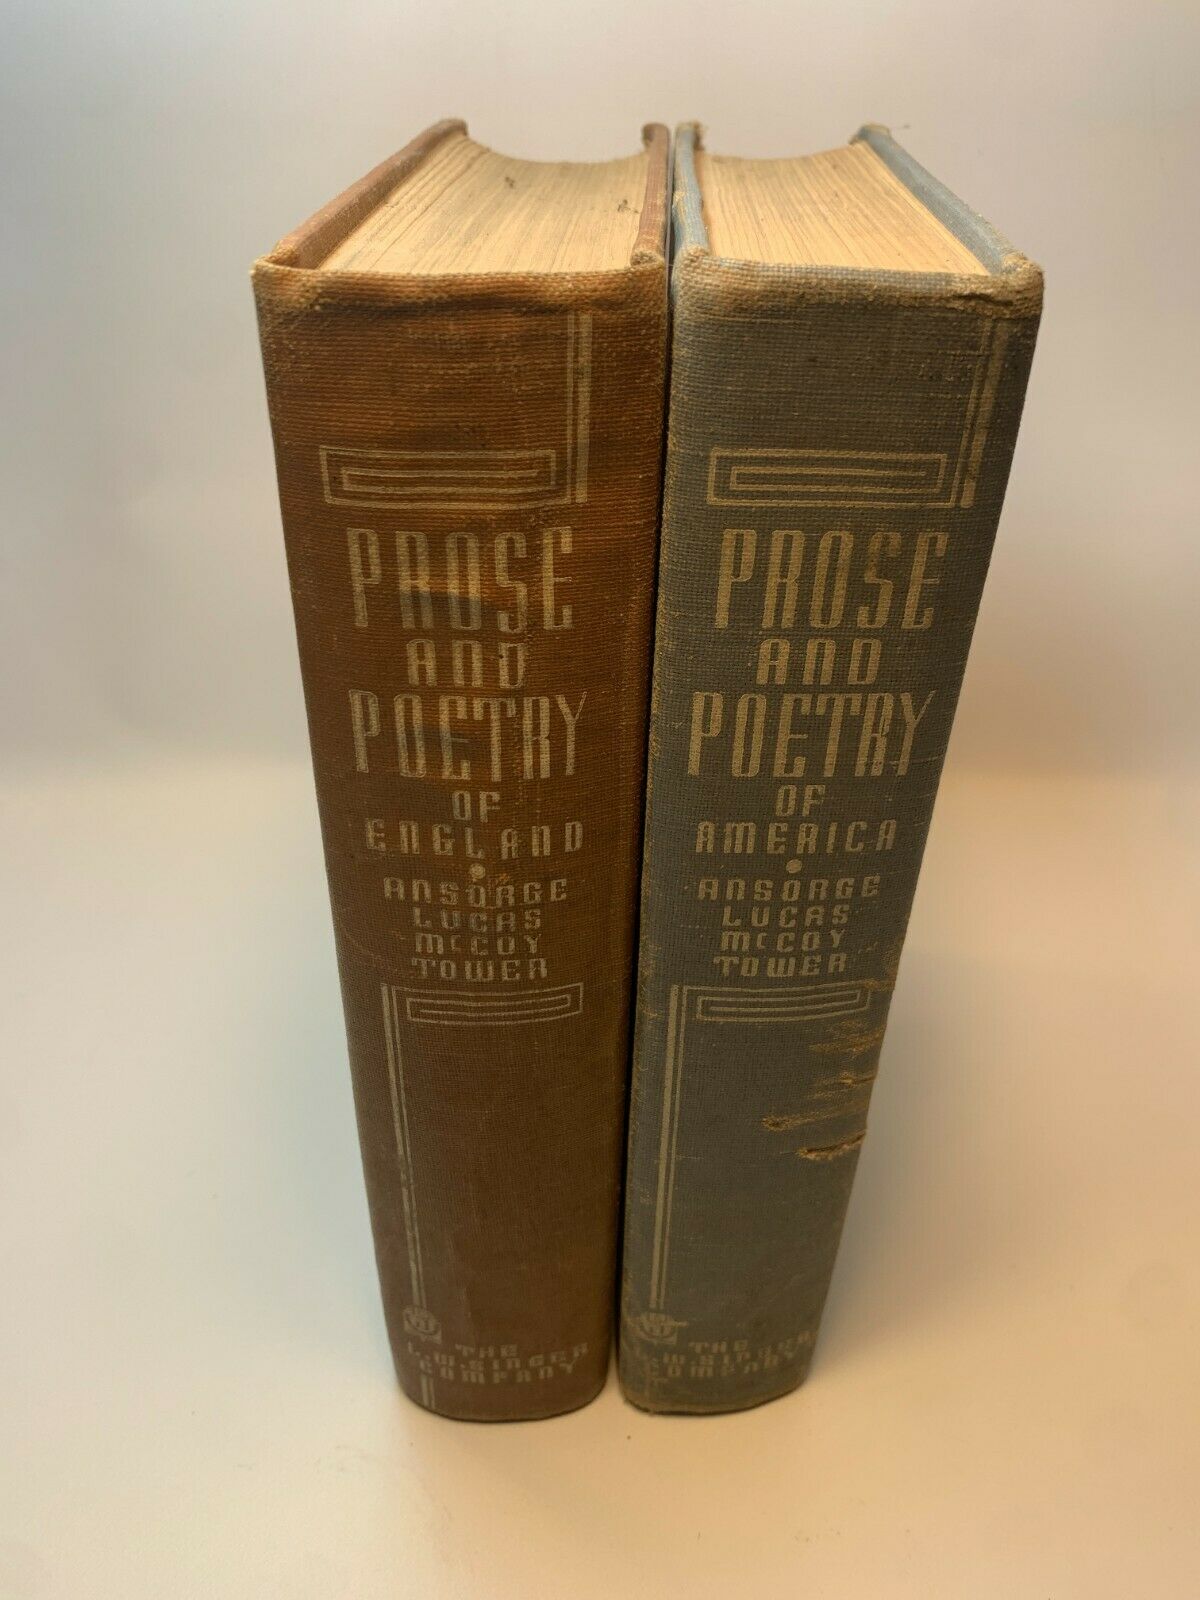 Prose and Poetry of England [1943] & Prose and Poetry of America [1942]